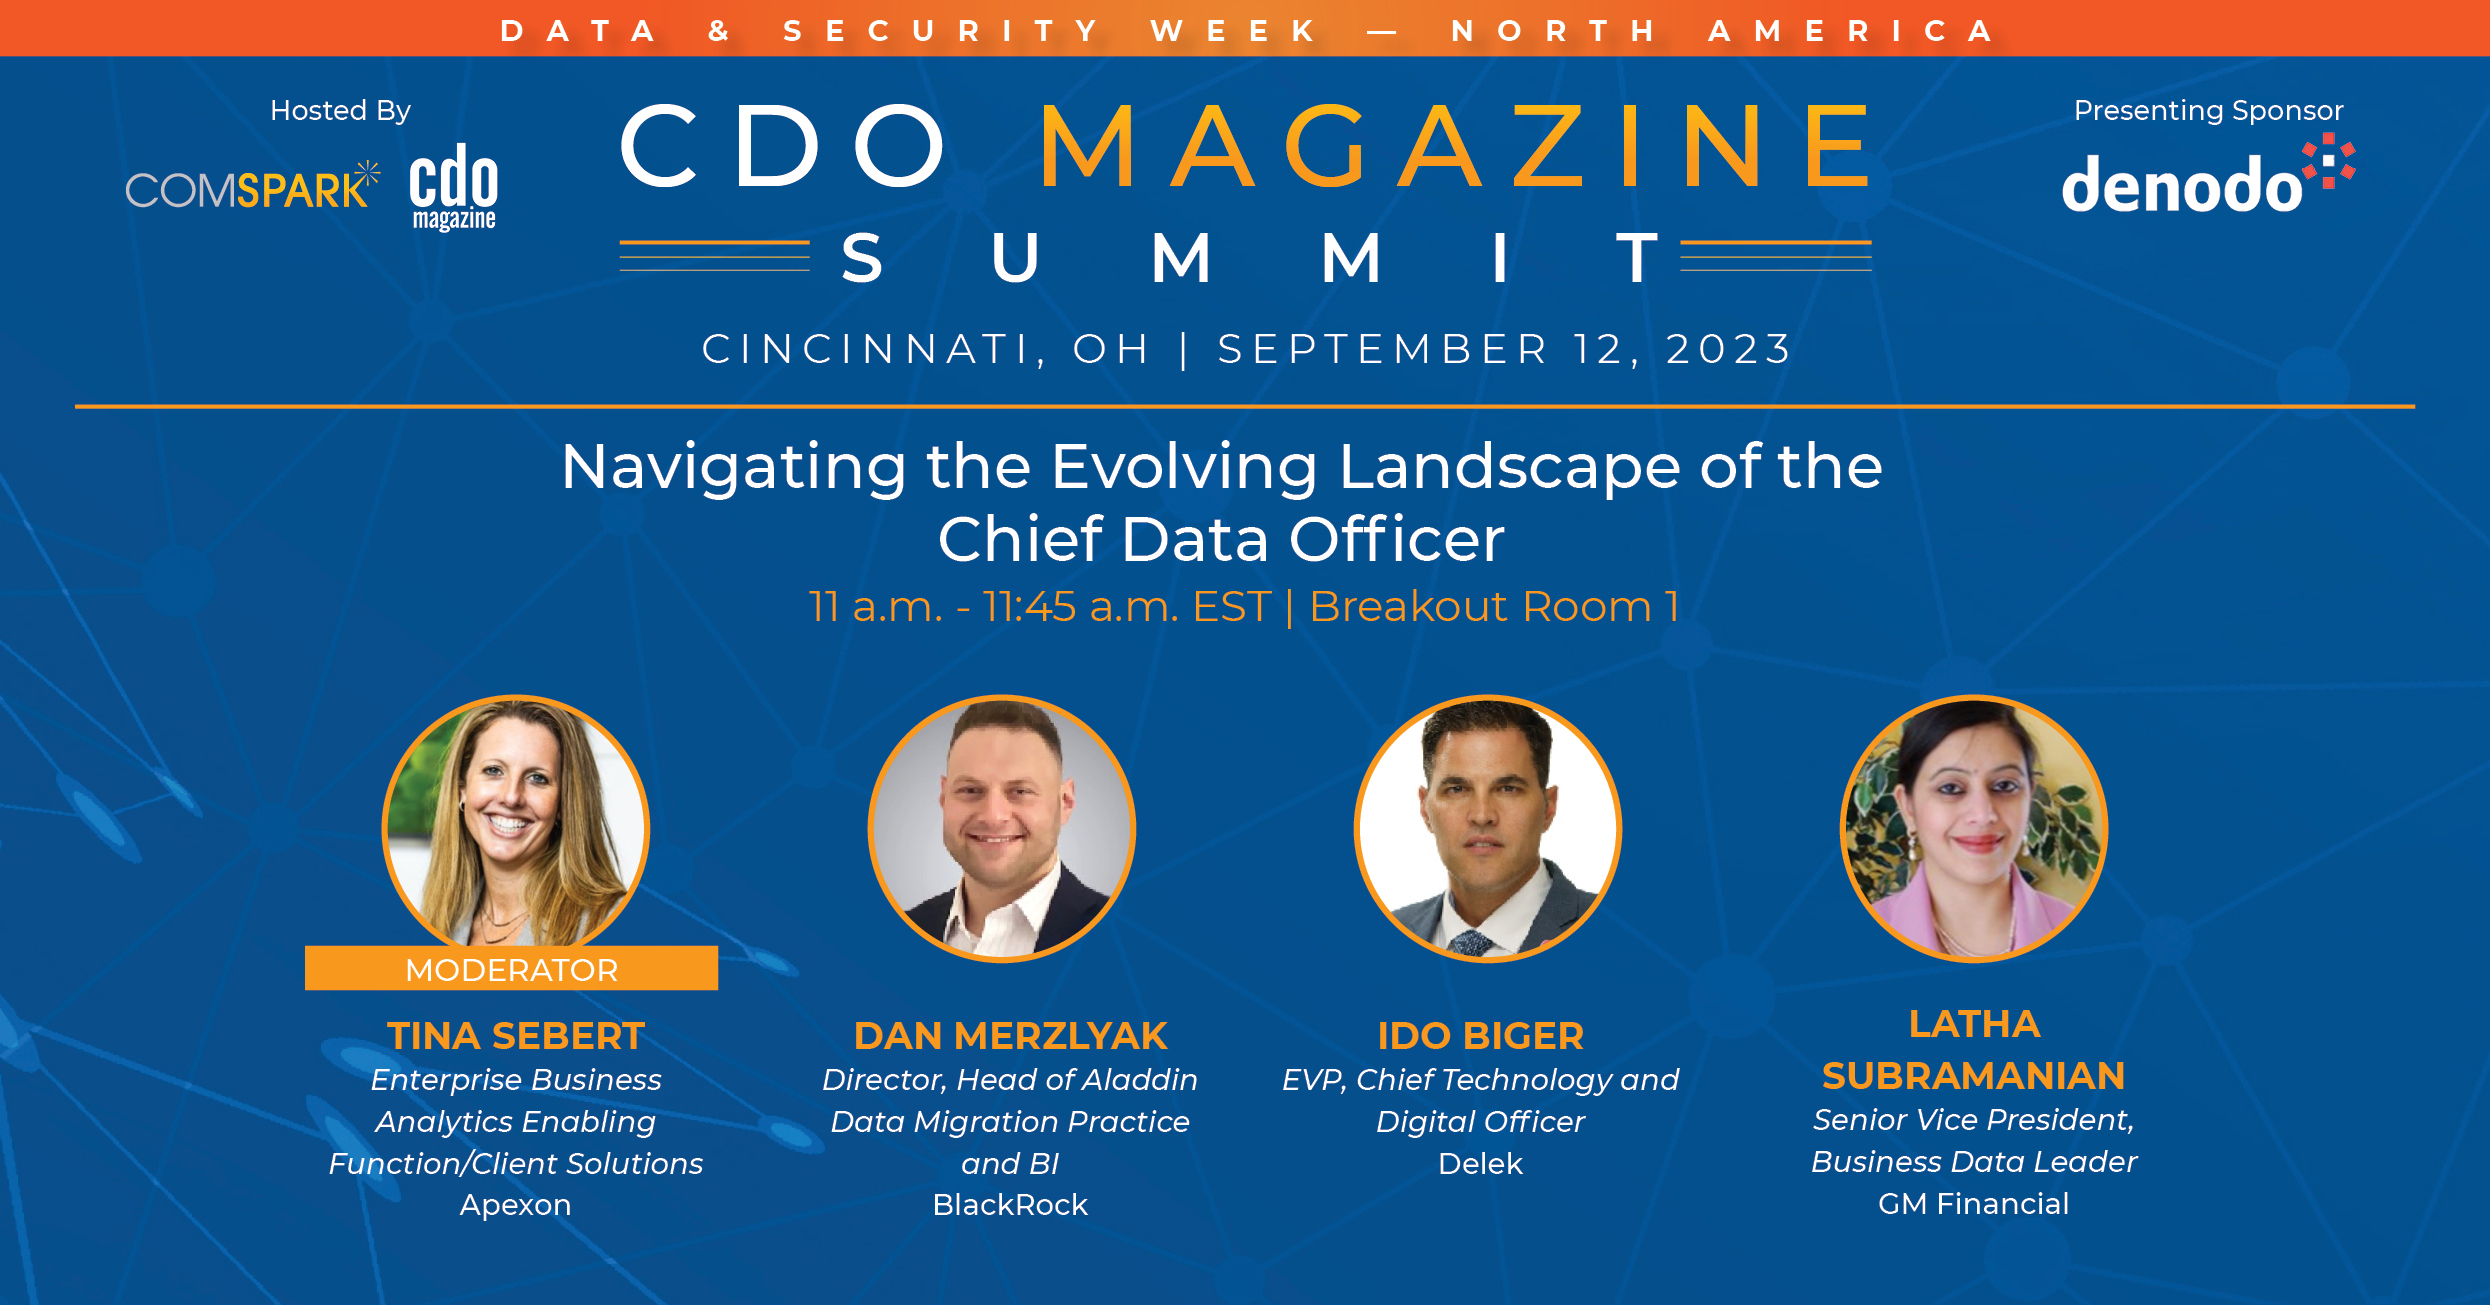 Join our Panel Discussion at the CDO Magazine Summit, 2023